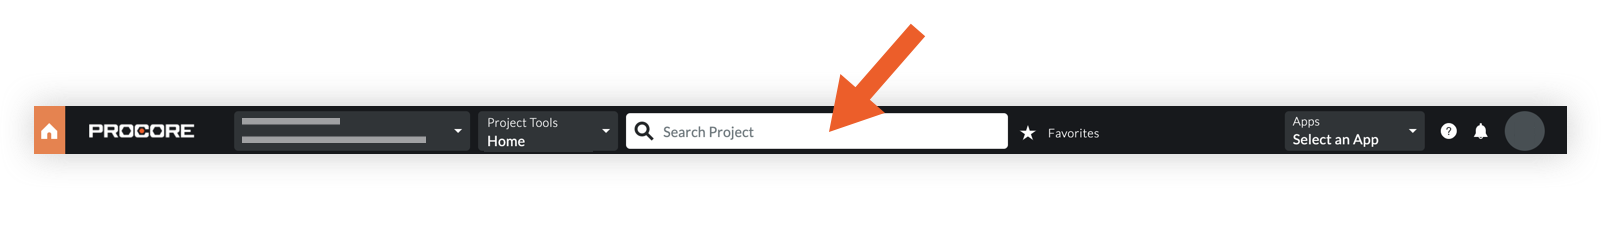 procore-search-bar-q2-2022.png